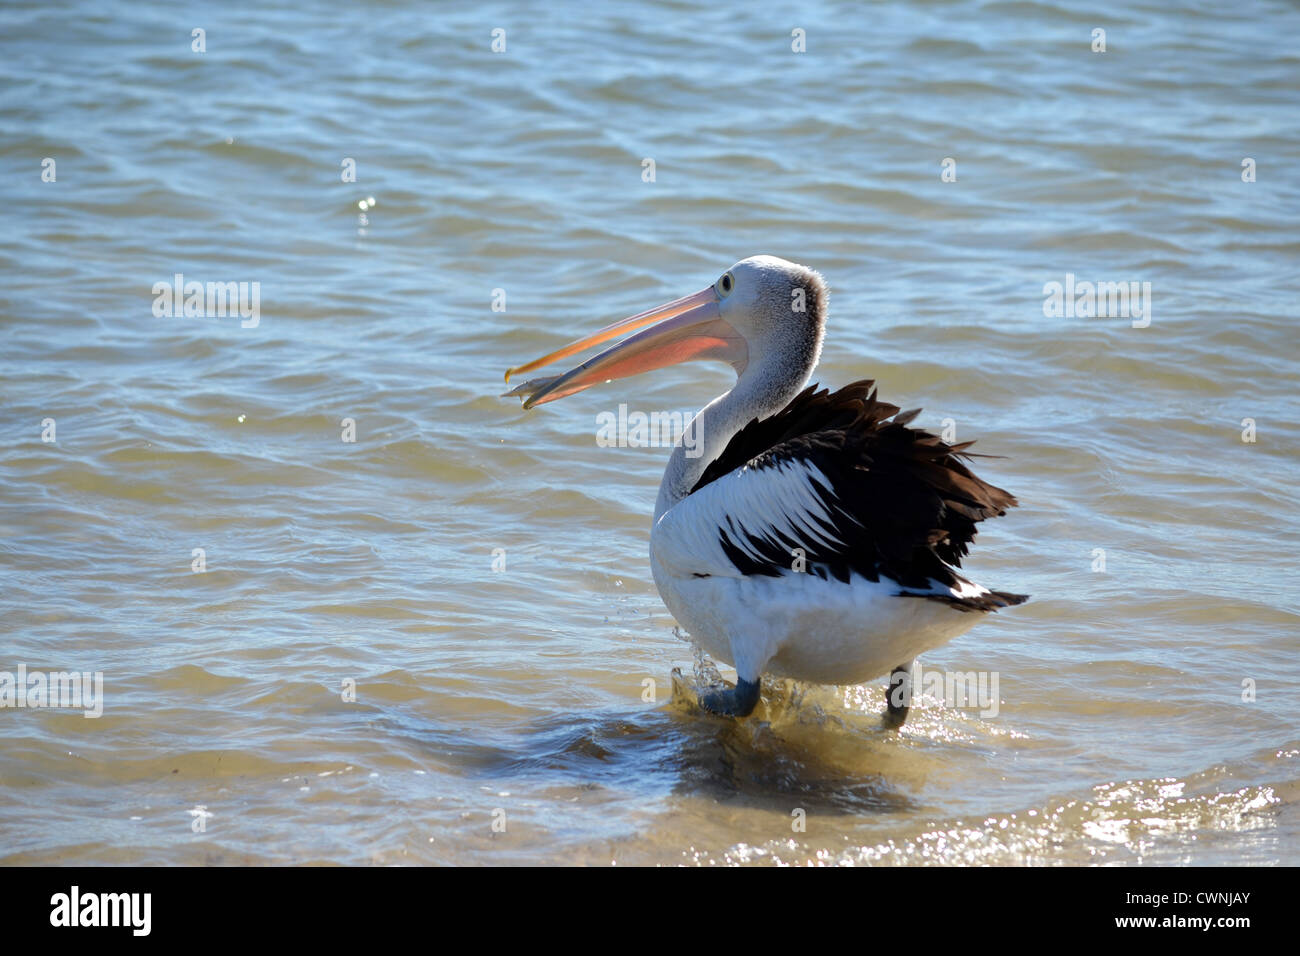 A pelican hanging out for a feed at the boat ramp Stock Photo